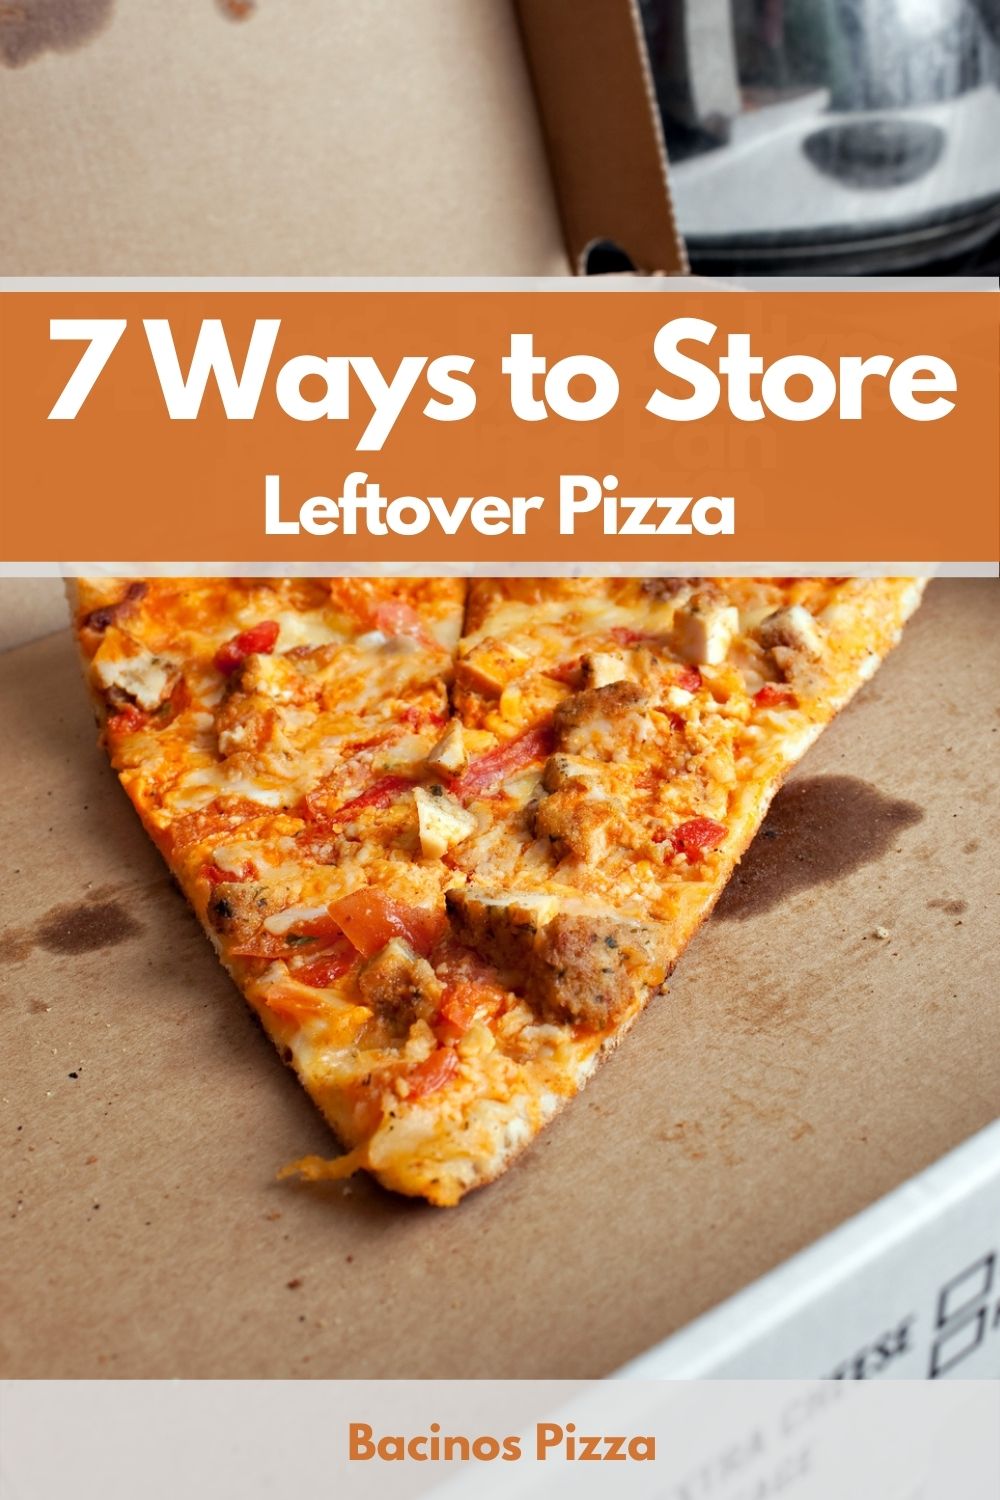 7 Ways to Store Leftover Pizza pin